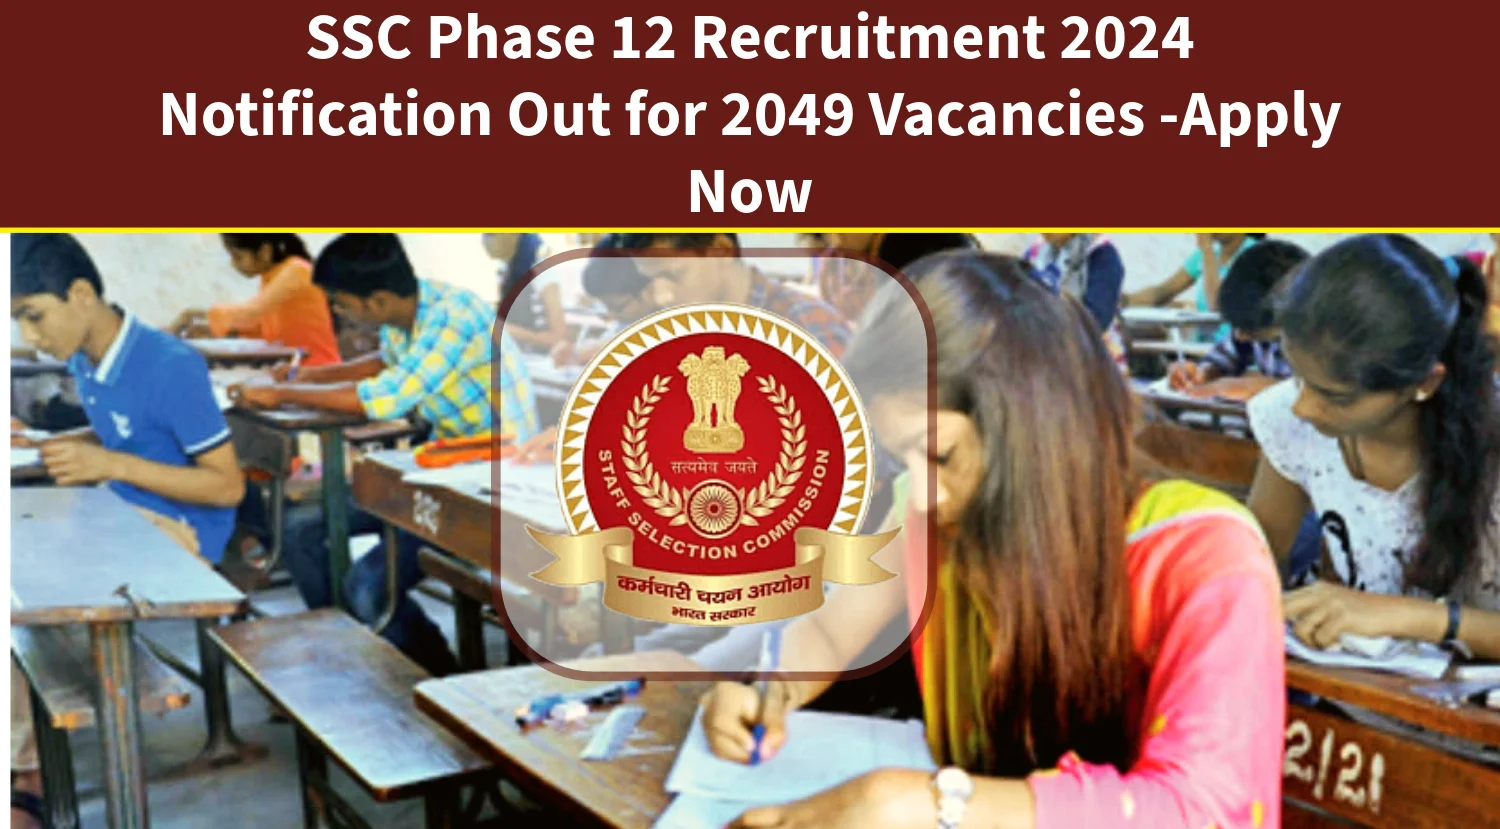 SSC Phase 12 Recruitment 2024 Notification Out for 2049 Vacancies